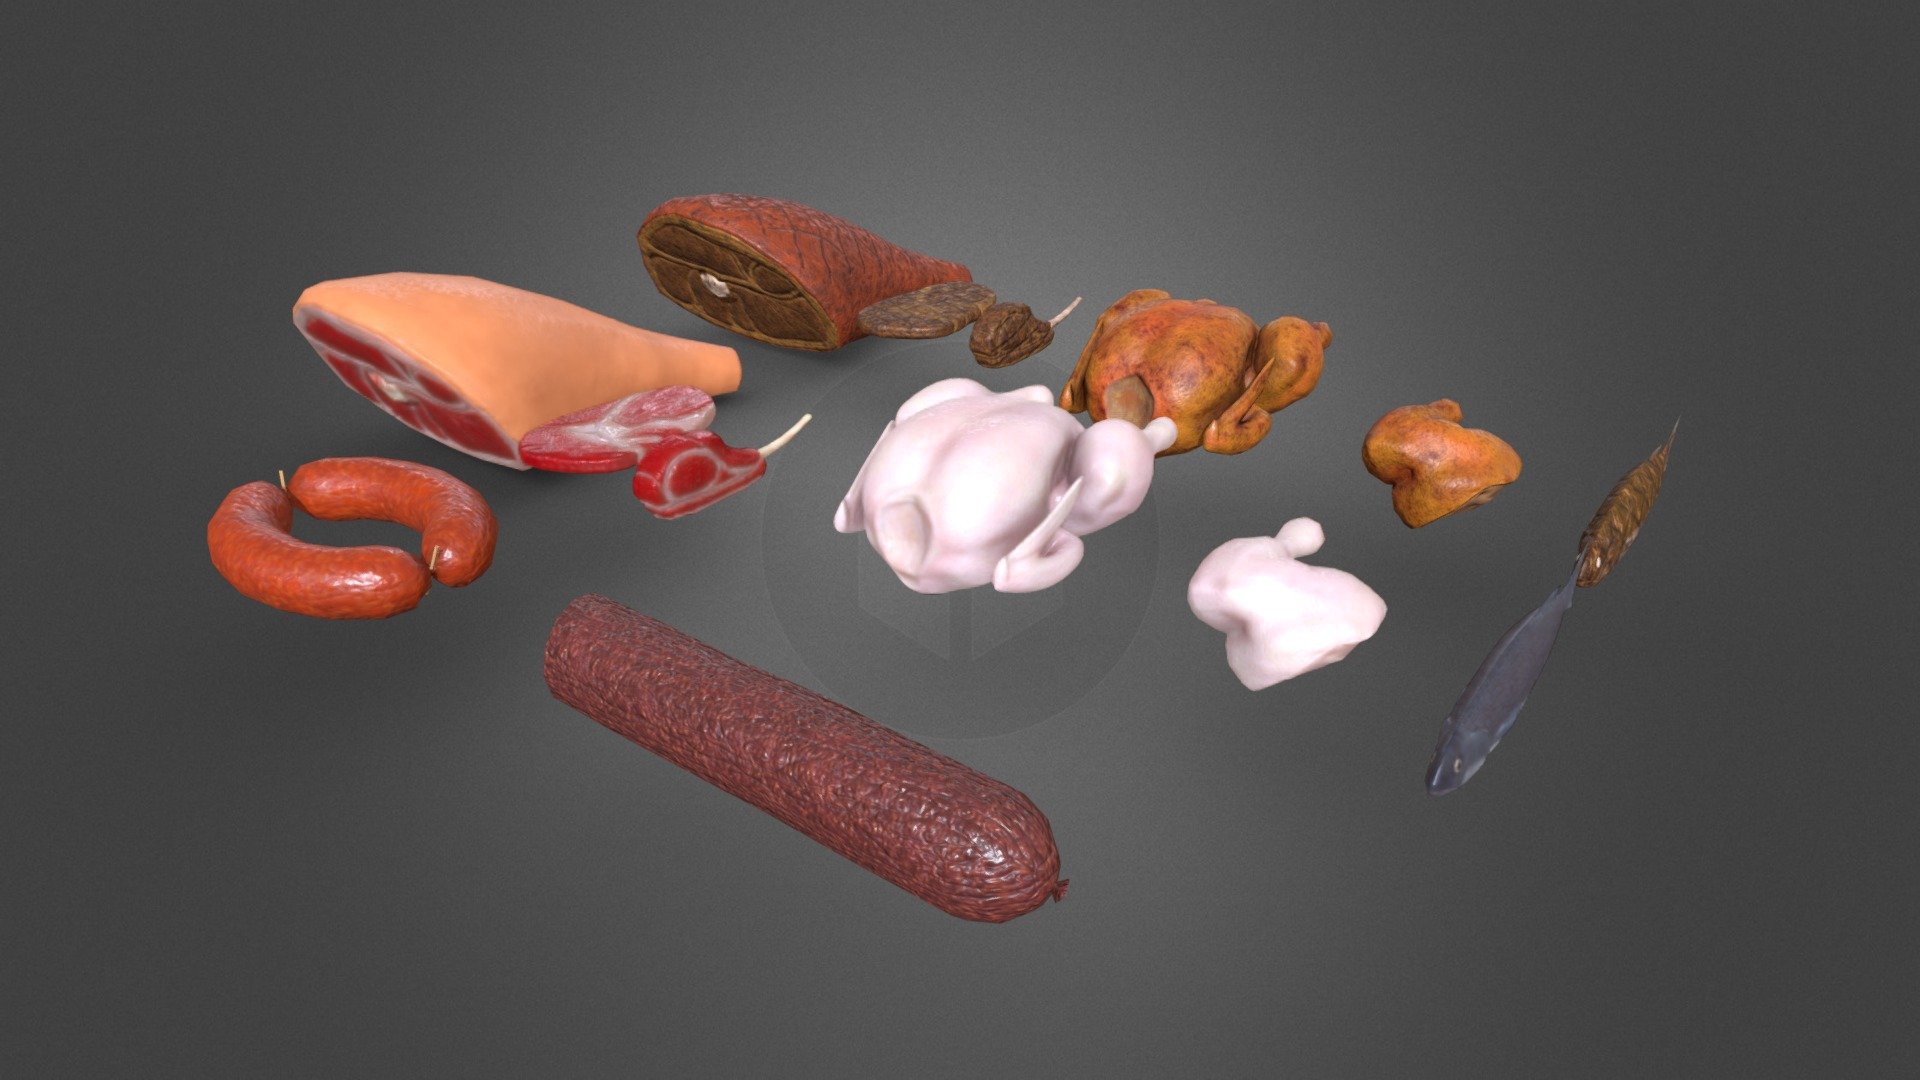 Low poly PBR 14 piece set of meat.

Features:




Including Chicken Leg, raw and cooked variant,

Including Chicken Whole, raw and cooked variant,

Including Fish, raw and cooked variant,

Including Pork Leg, raw and cooked variant,

Inclduing Salami,

Including Sausage,

Including Steak Rib, cooked and raw variant

Including Steak, cooked and raw variant,

Great for renders as well as game assets

For support or other information please send us an e-mail at info@sunbox.games

Check out our other work at sunbox.games - Meat Set - Steak Sausage Rib Fish Chicken - Buy Royalty Free 3D model by Sunbox Games (@sunboxgames) 3d model